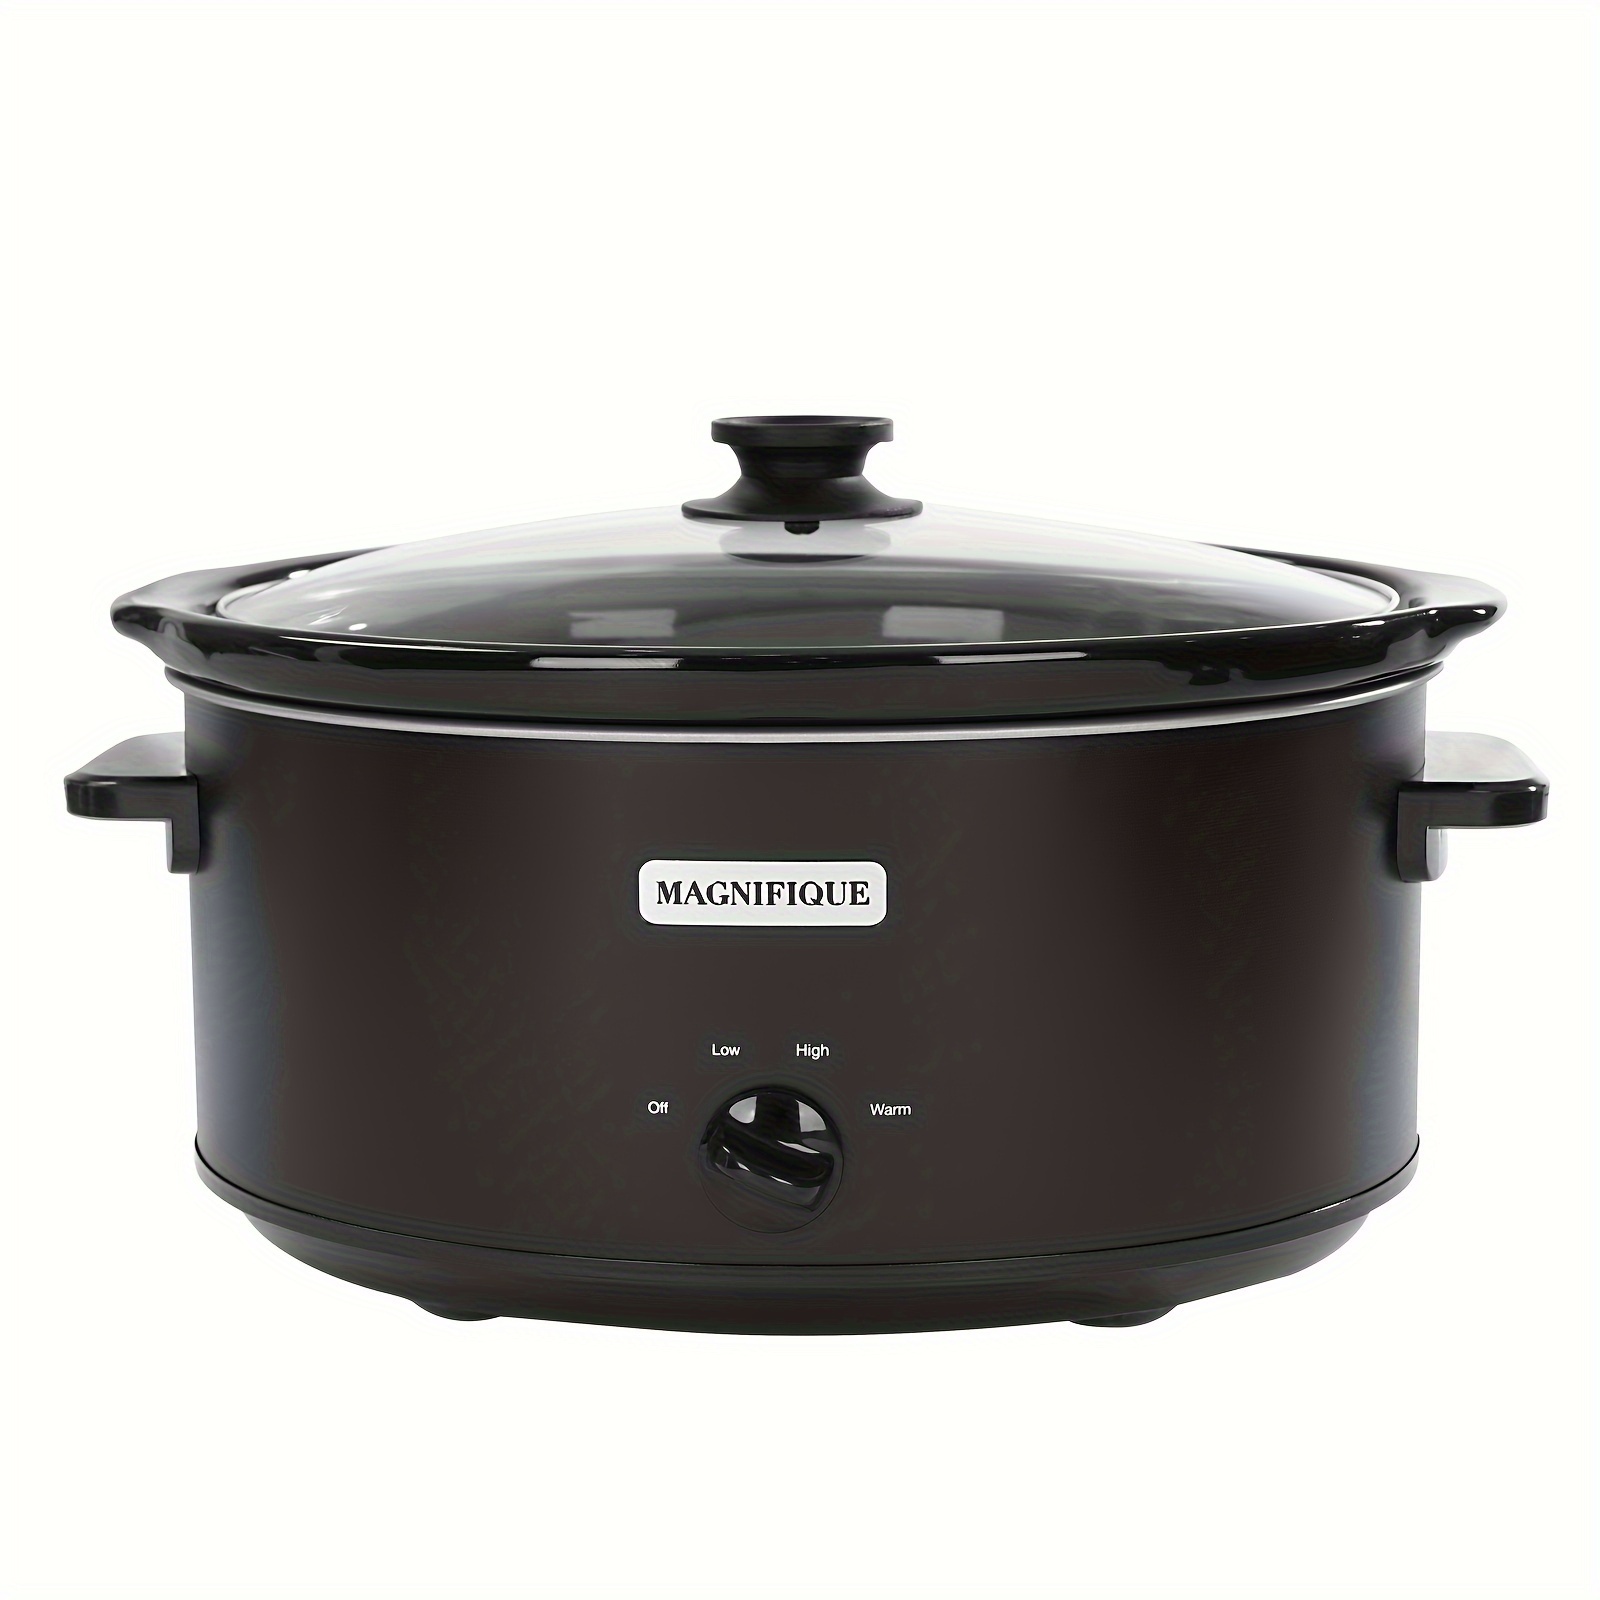 

1pc, Magnifique 7 Quart Slow Cooker Oval Manual Pot Food Warmer With 3 Cooking Settings, Black Stainless Steel